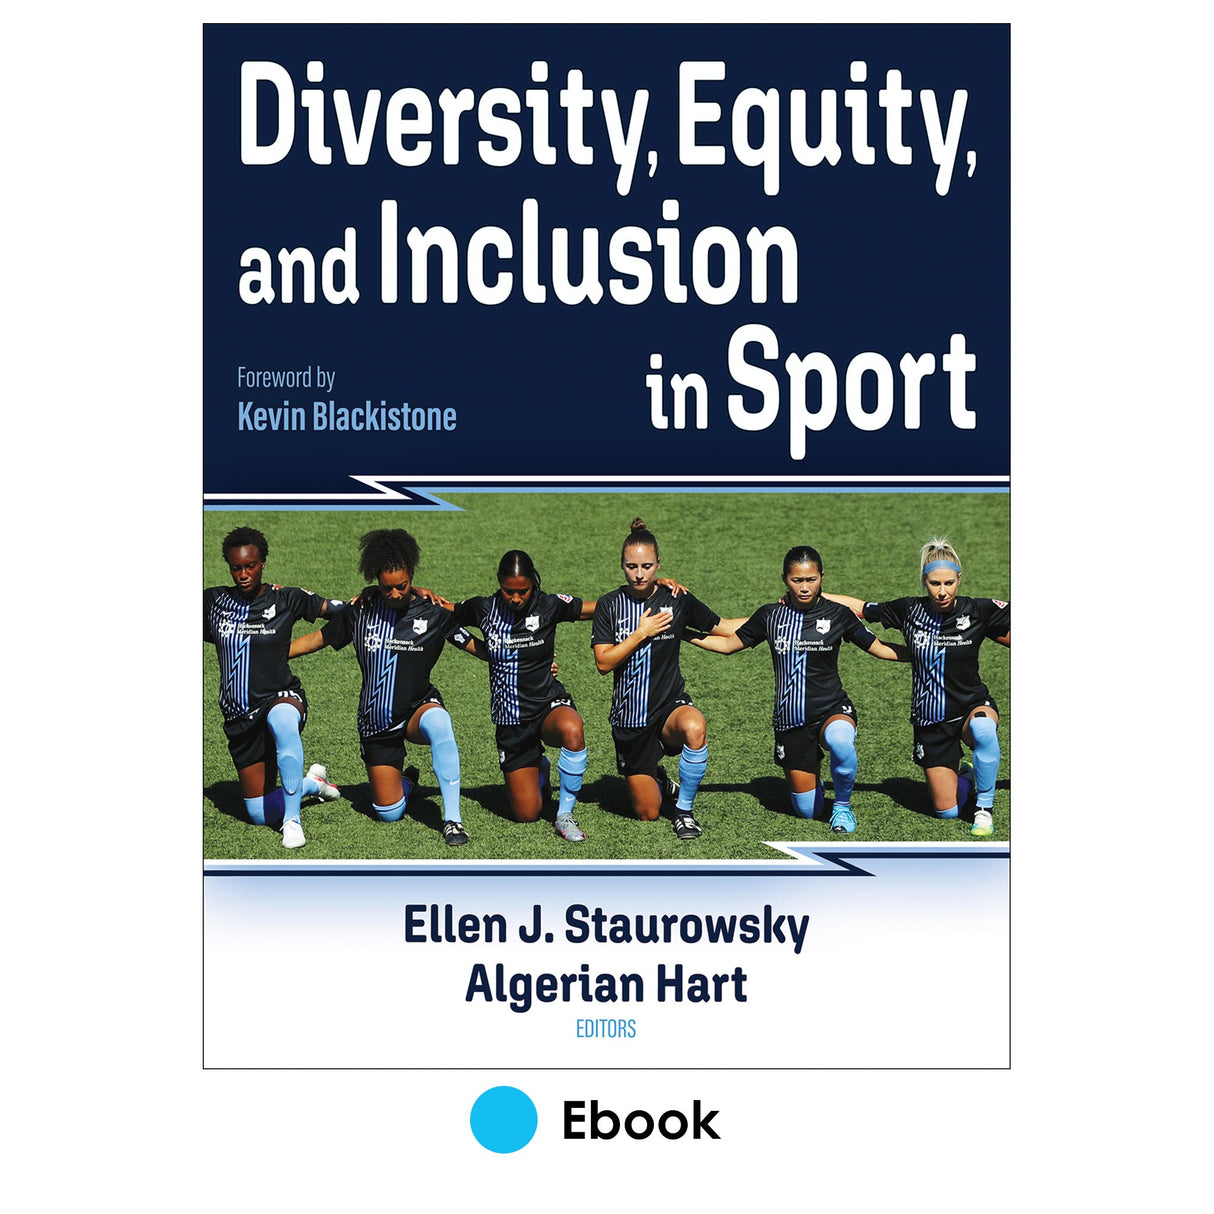 Diversity, Equity, and Inclusion in Sport epub